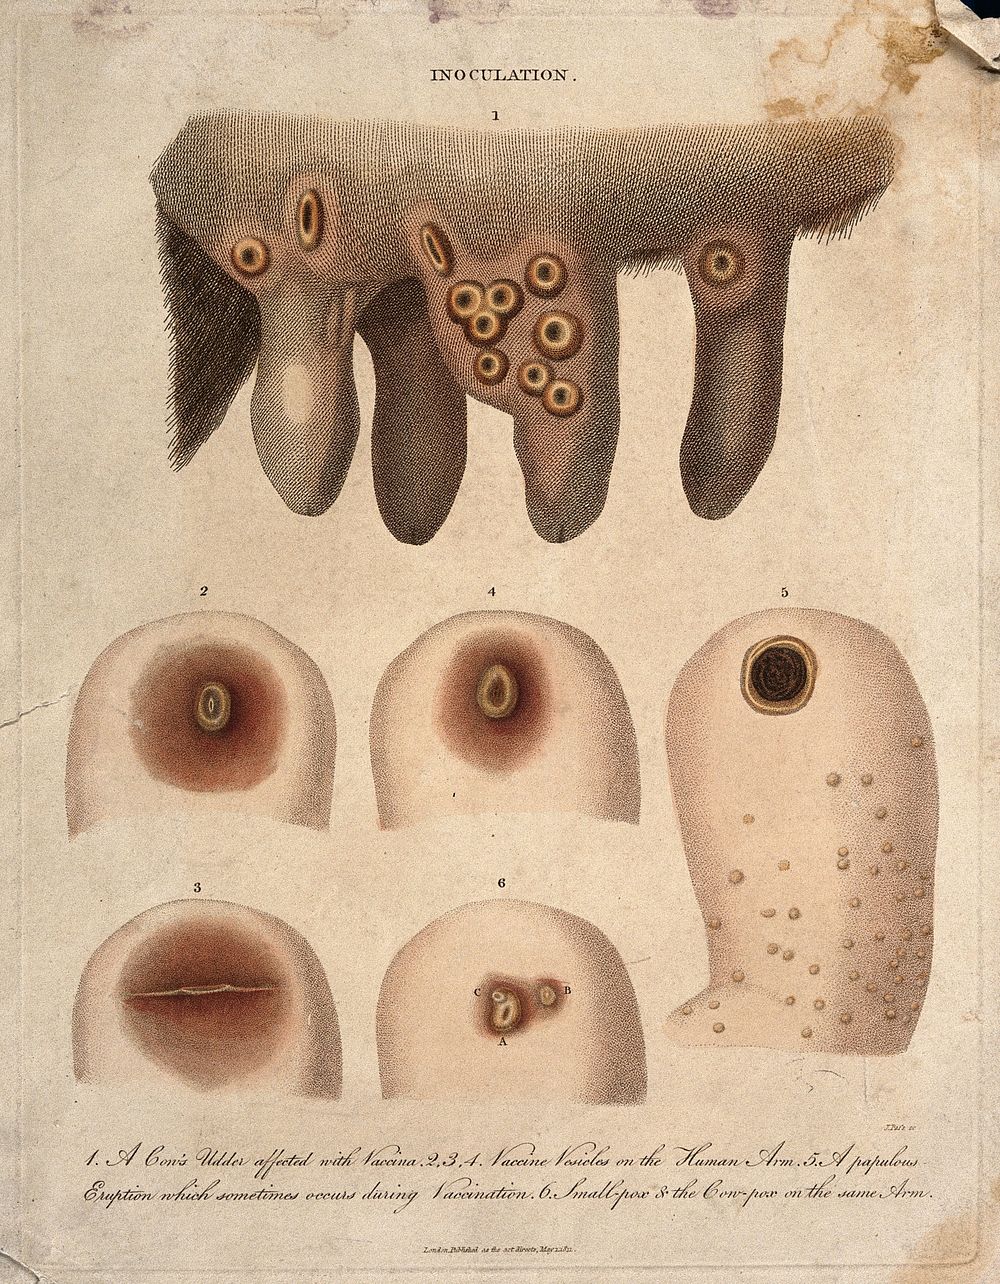 A cow's udder with vaccinia pustules and human arms exhibiting both smallpox and cowpox pustules. Coloured engraving by J.…